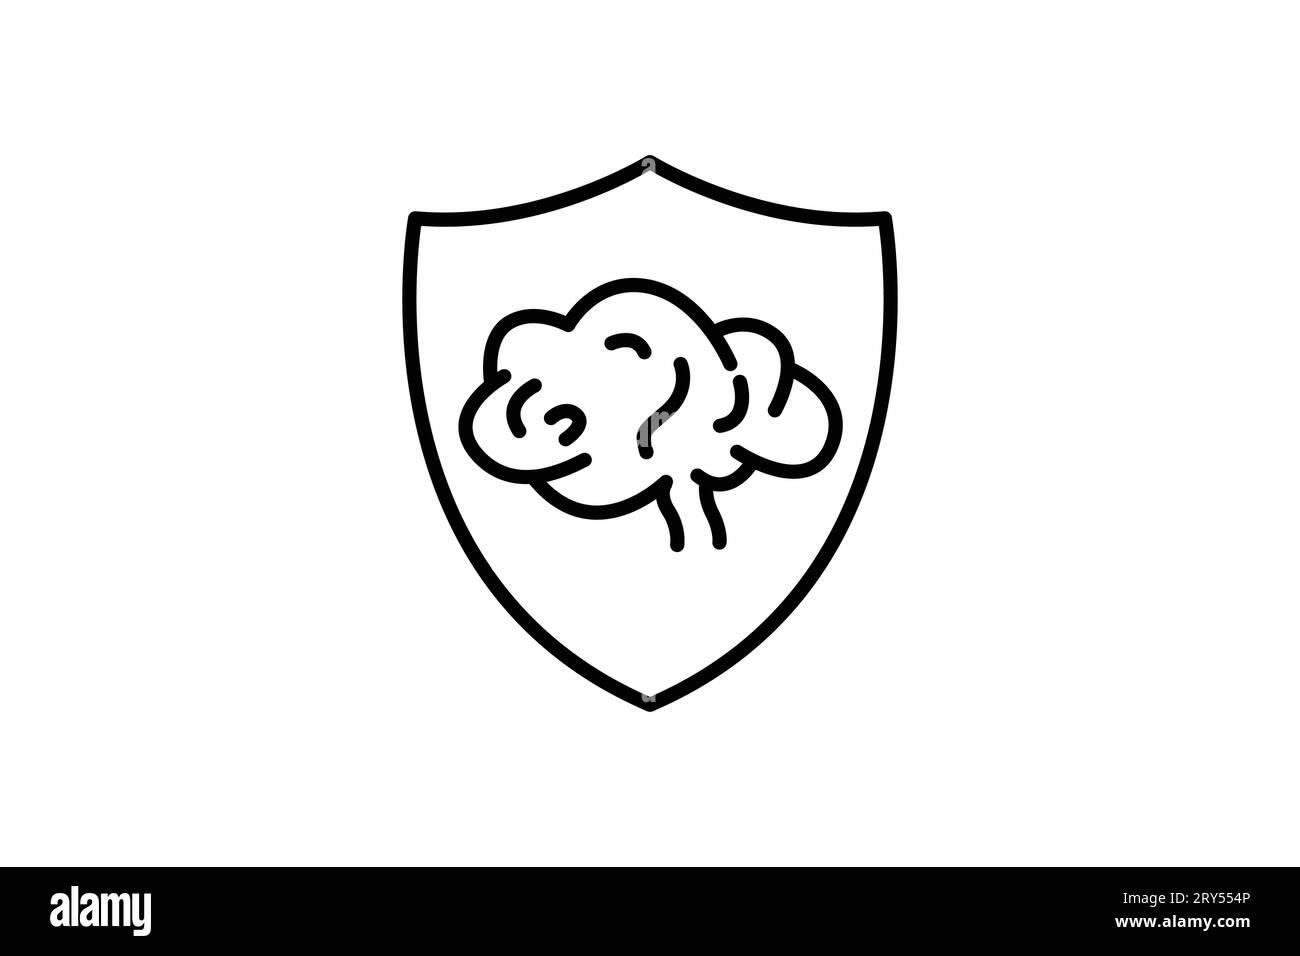 Defense against fallacies icon. shield with brain, icon related to critical thinking. suitable for web site design, app, user interfaces, printable et Stock Vector